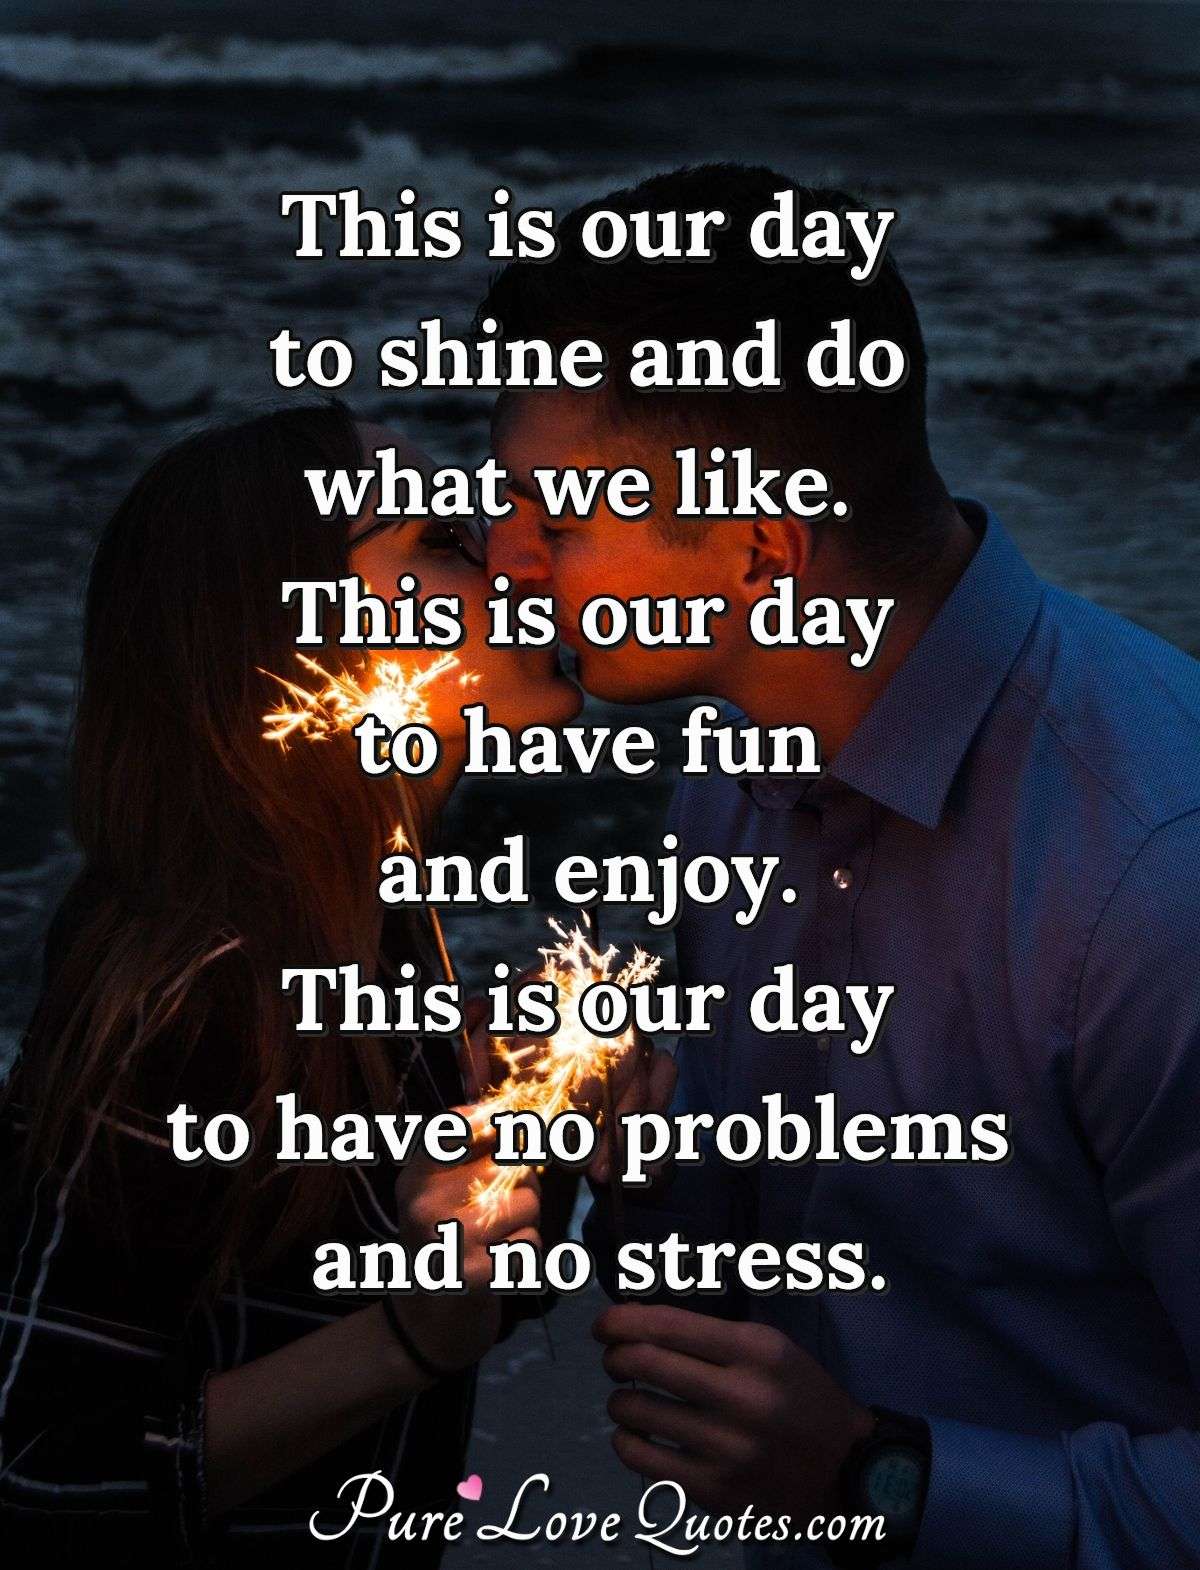 This is our day to shine and do what we like.  This is our day to have fun and enjoy.  This is our day to have no problems and no stress. - PureLoveQuotes.com